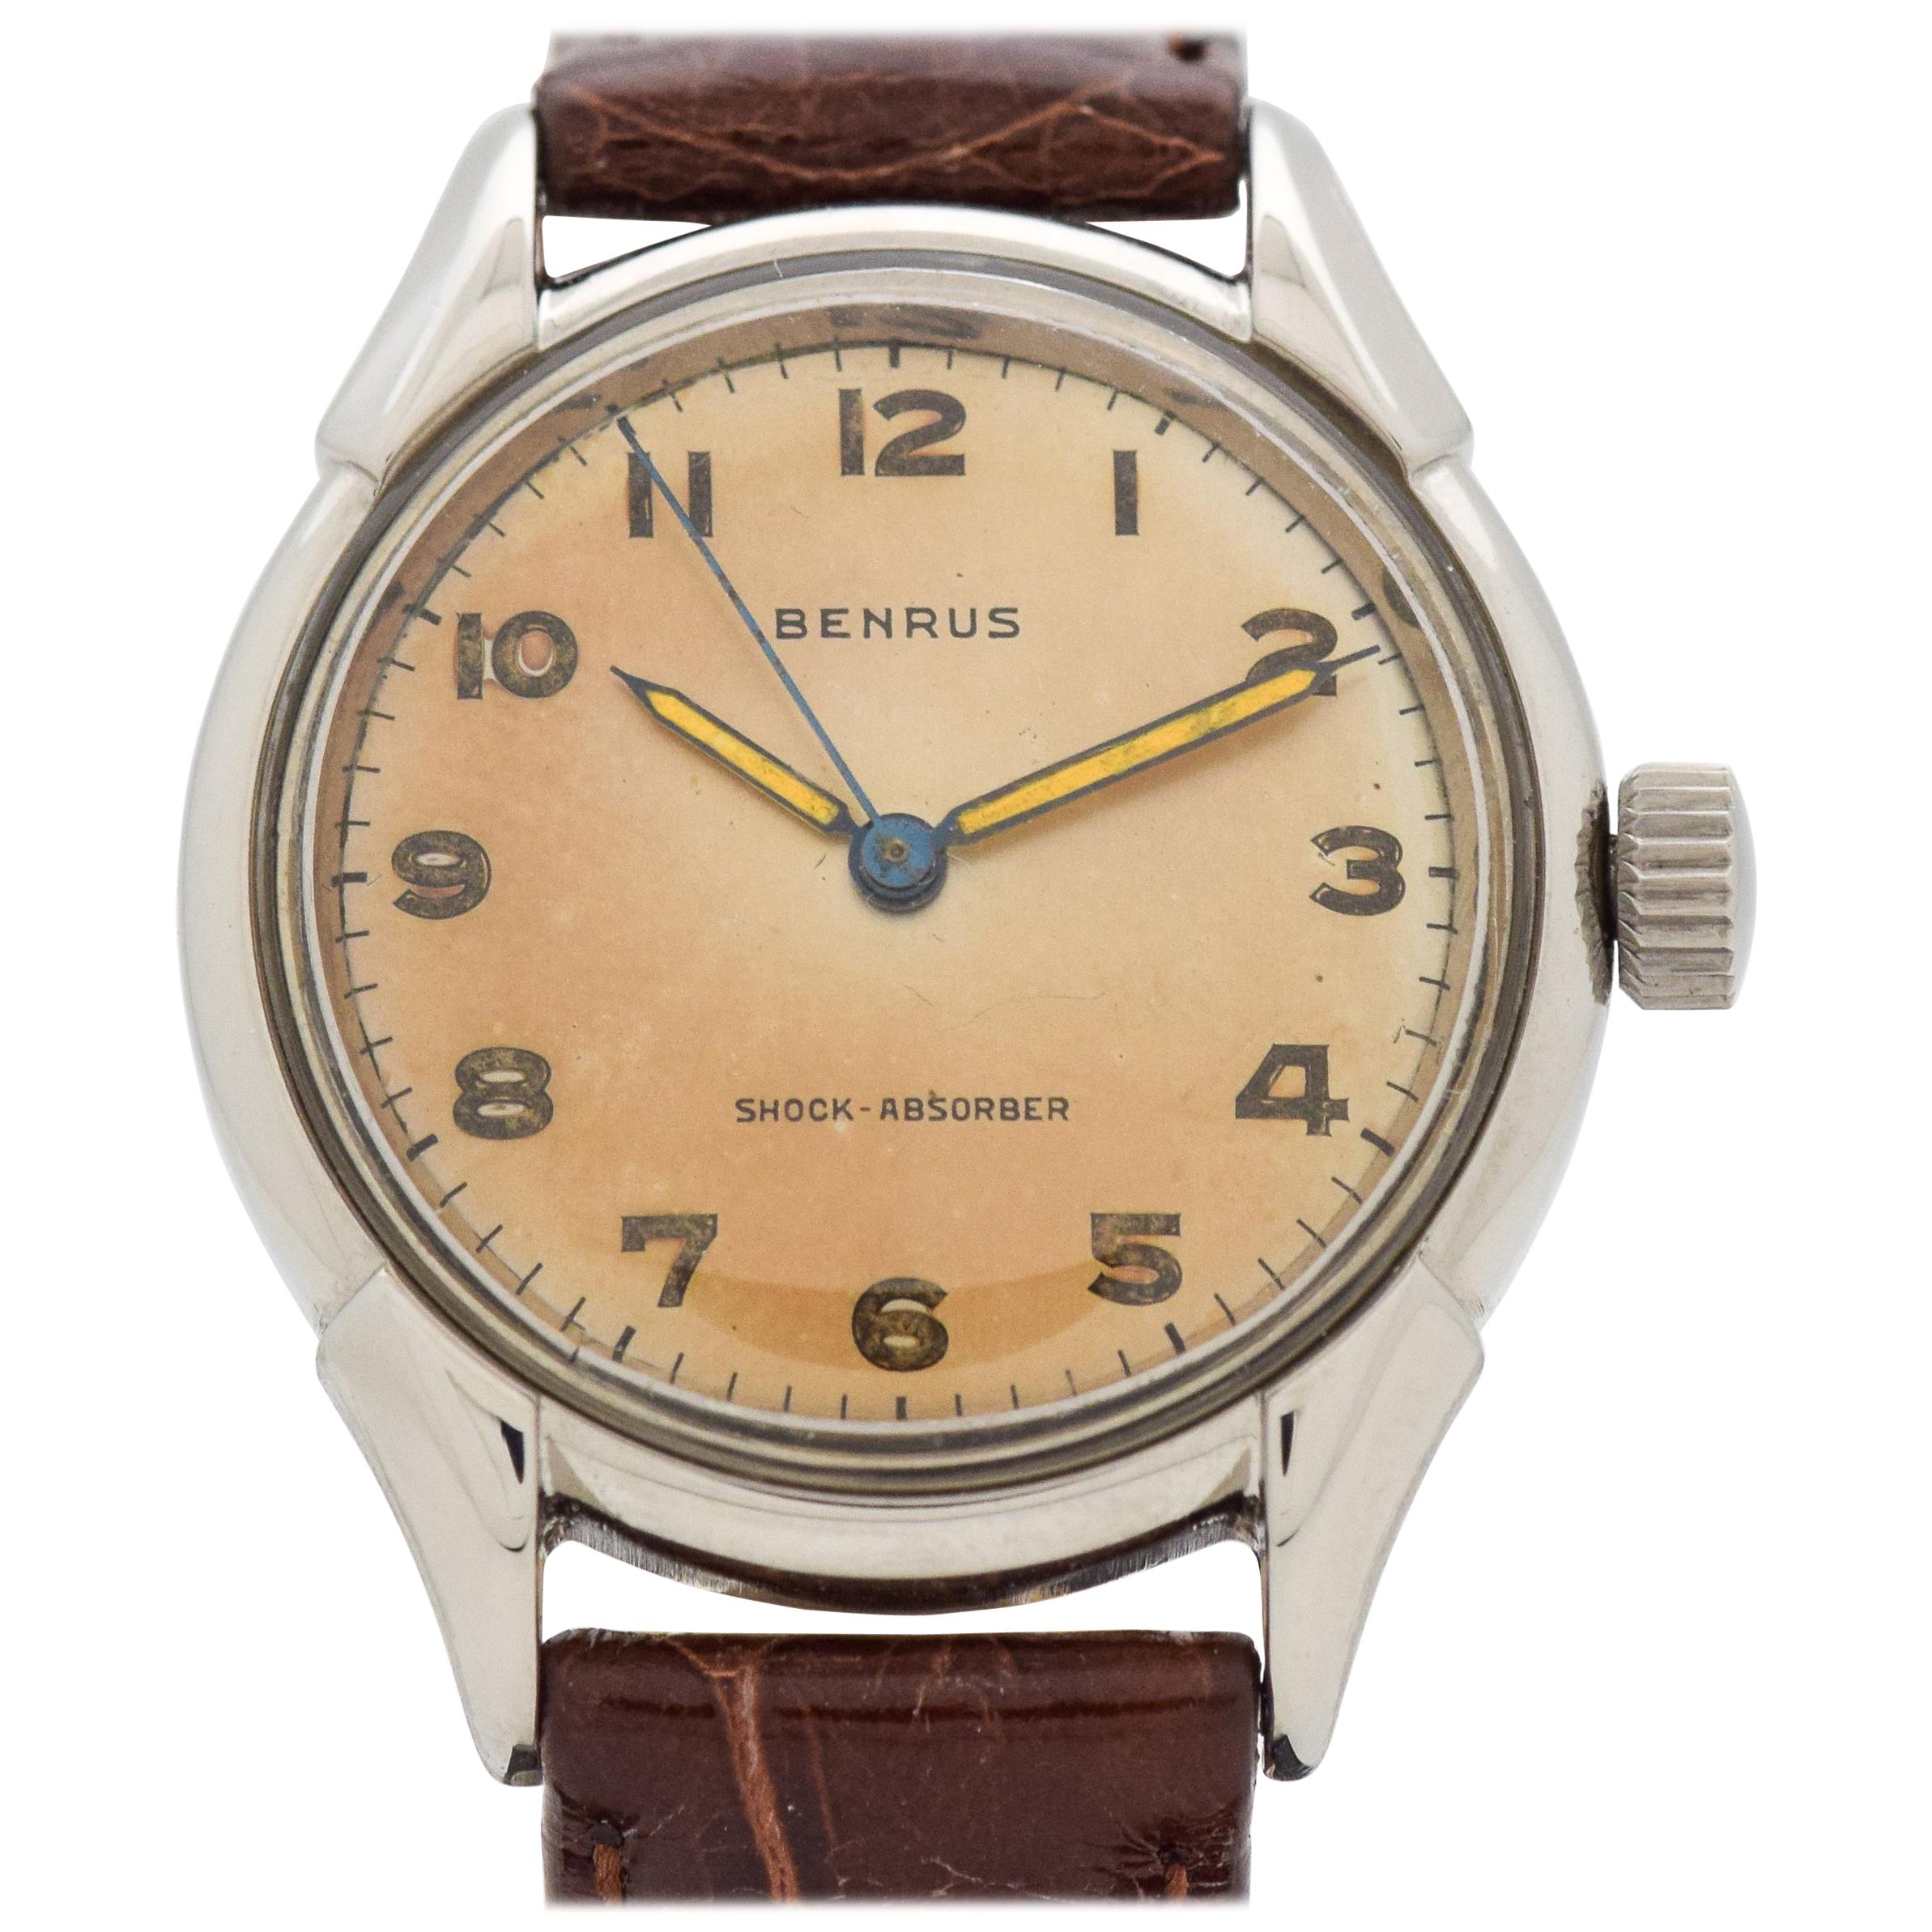 Vintage Benrus Stainless Steel Watch, 1950s-1960s